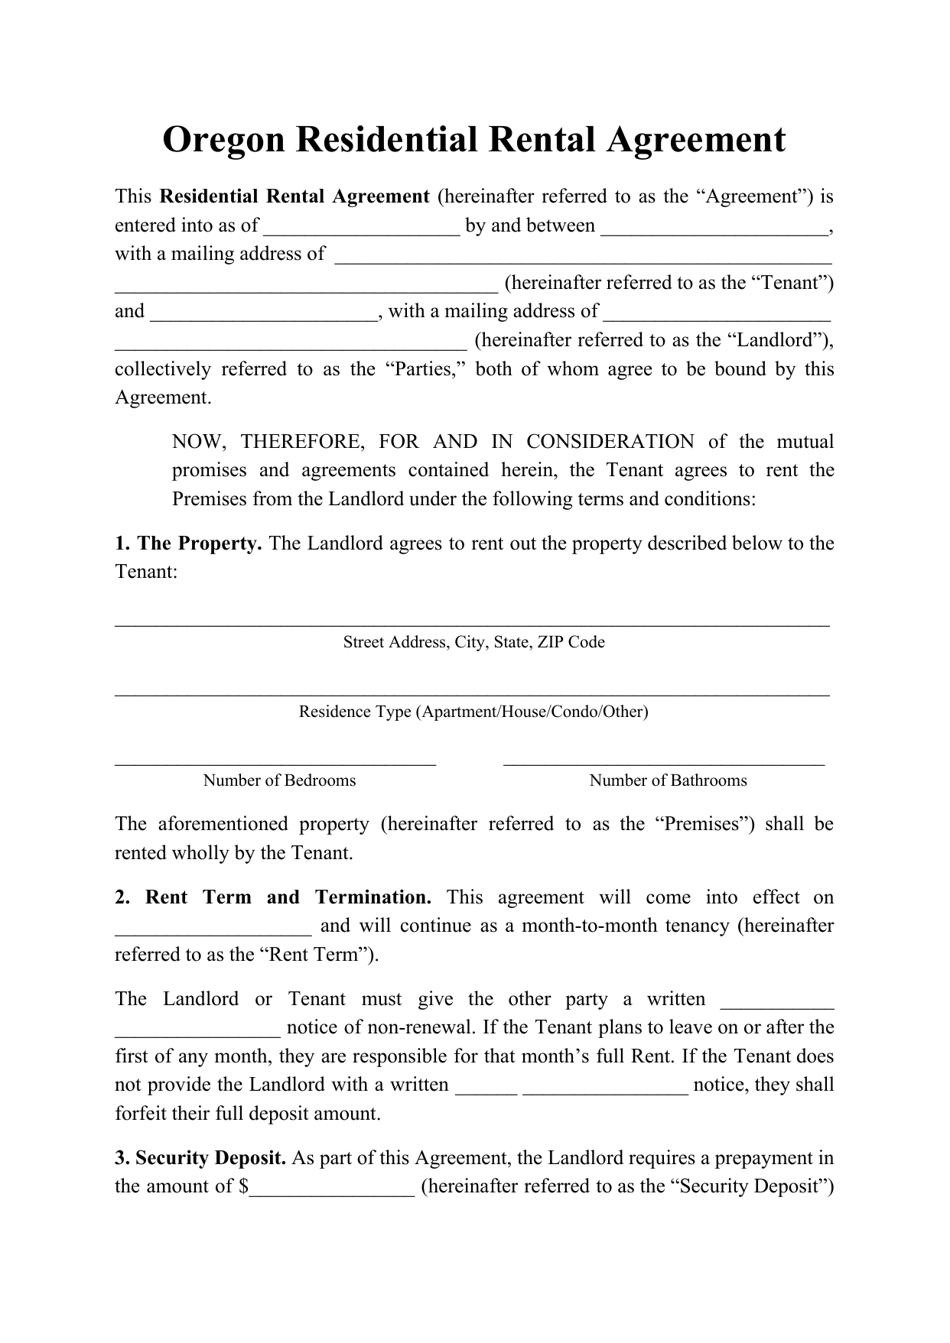 Oregon Residential Rental Agreement Template Fill Out Sign Online